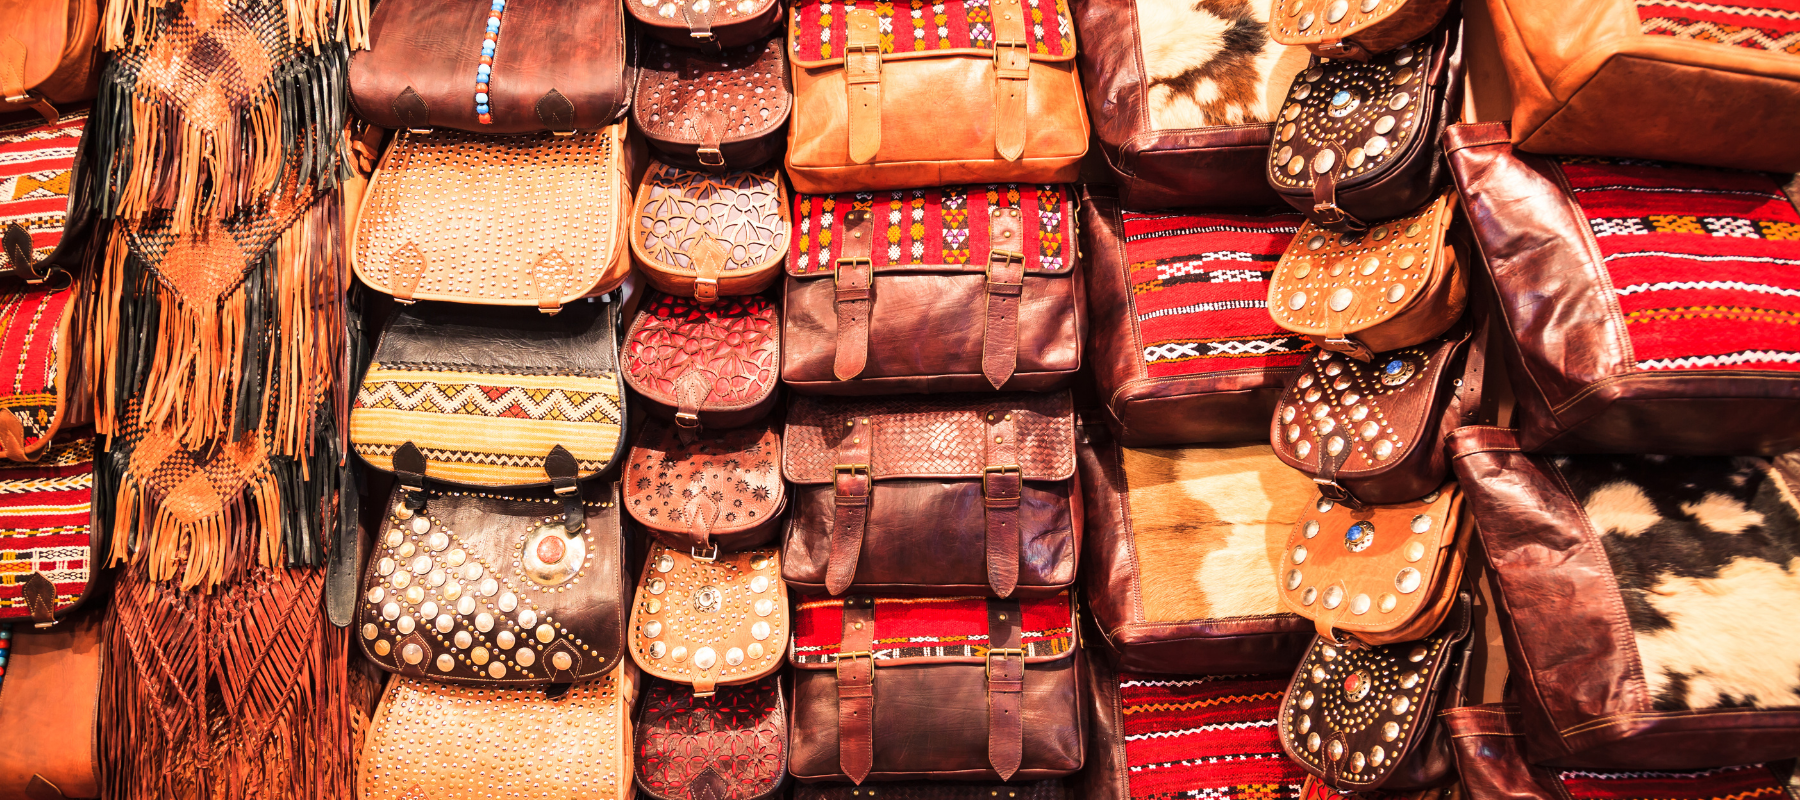 Moroccan leather bags